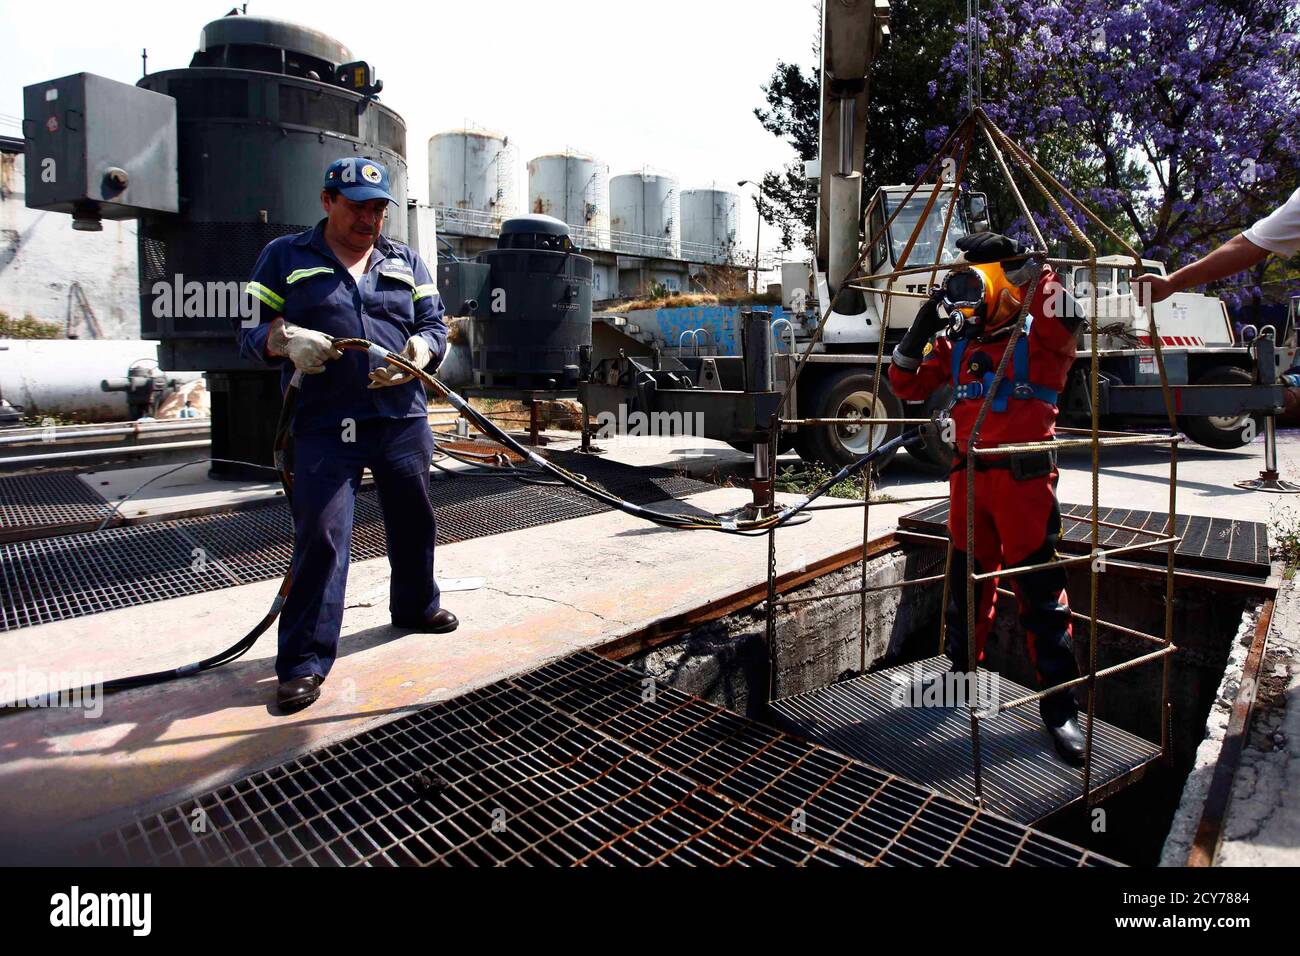 Mexican sewer diver Julio Cu Camara, 52, is lowered down in a cage before a dive at the city's drainage system plant in Mexico City March 21, 2013. Cu Camara's job involves diving in the city's sewage system to clear blockages and repair infrastructure, on an average of four times a month, for about 30 minutes to six hours depending on the amount of work needed. Cu Camara, who started working as a sewer diver 30 years ago, uses a diving suit and helmet that weigh more than 40 kg to protect him during his dives. During his working experience, he has found dead humans, horses, weapons and car pa Stock Photo